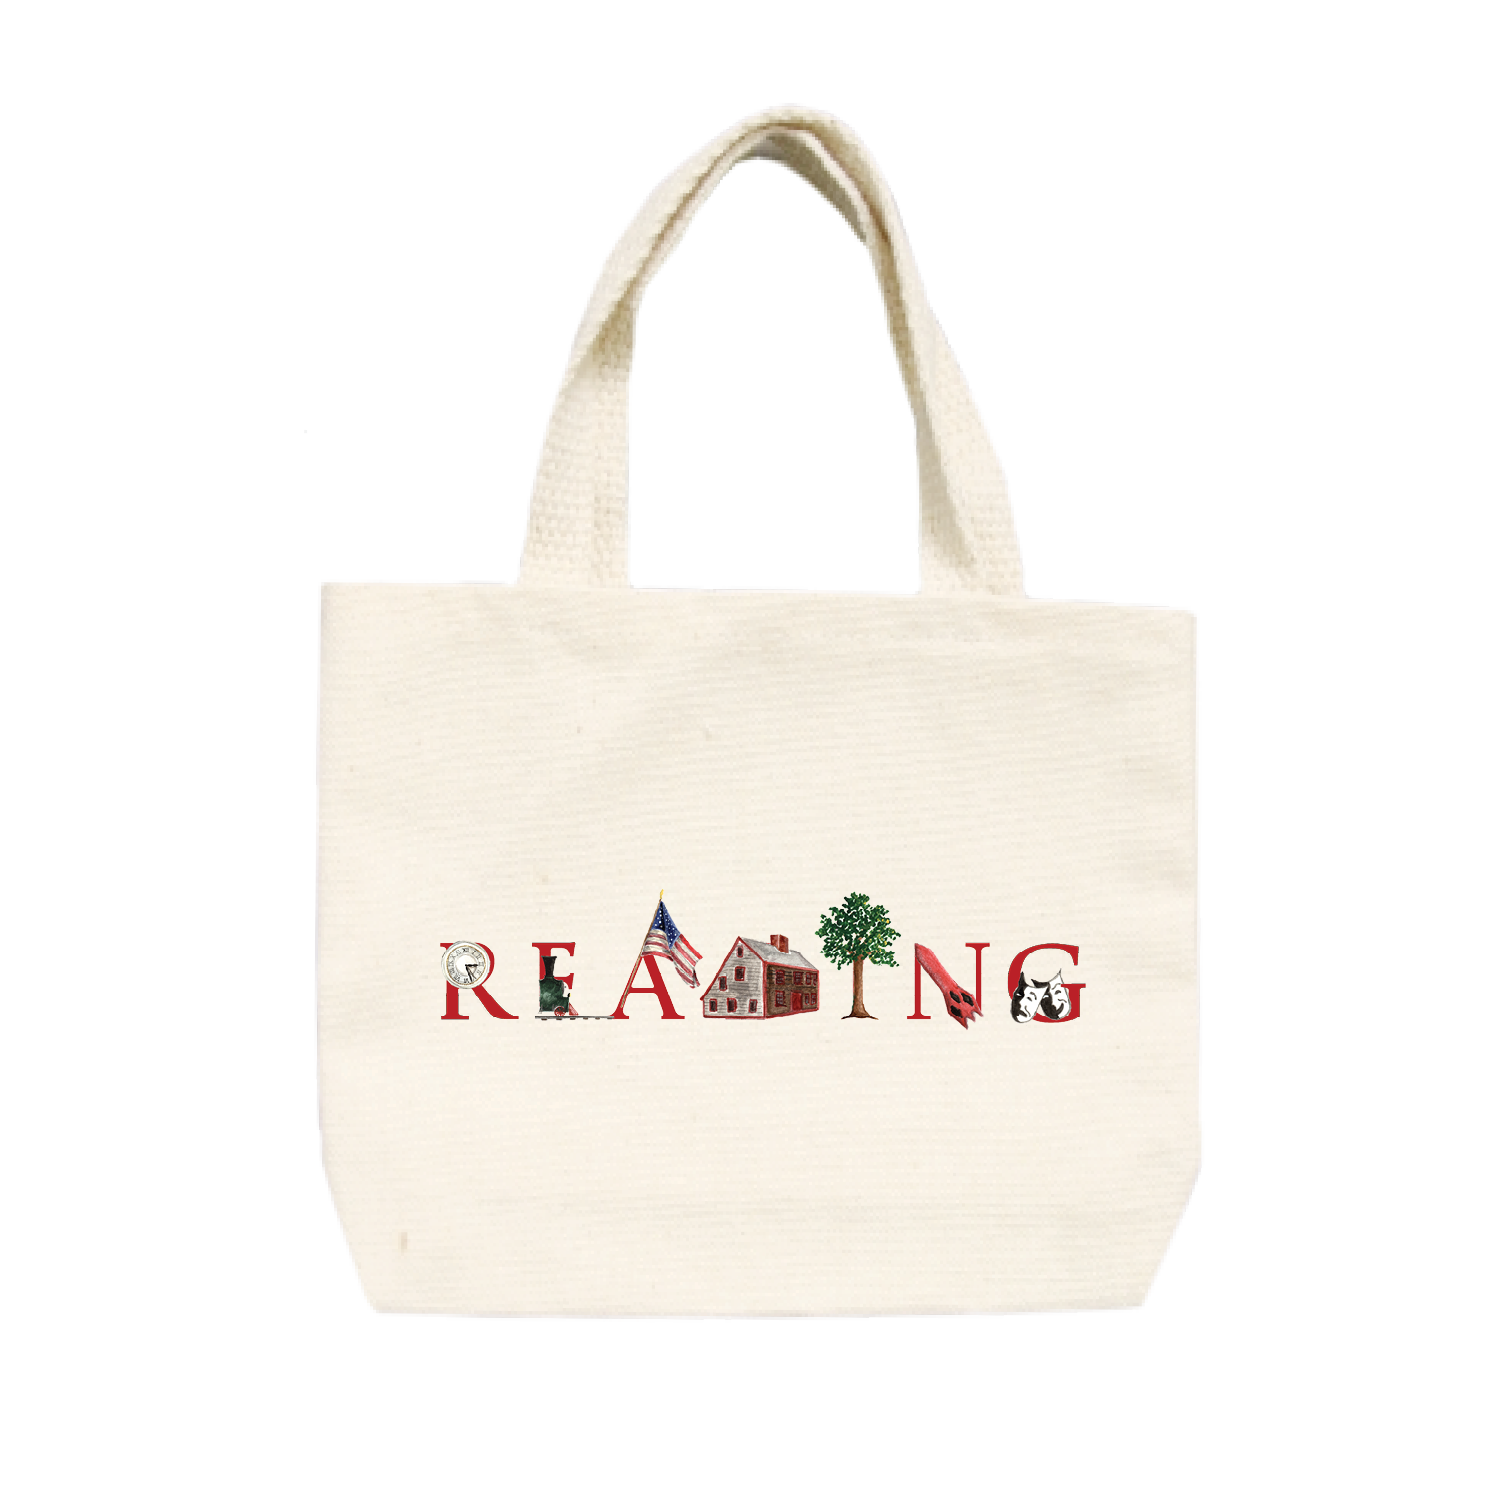 Reading small tote